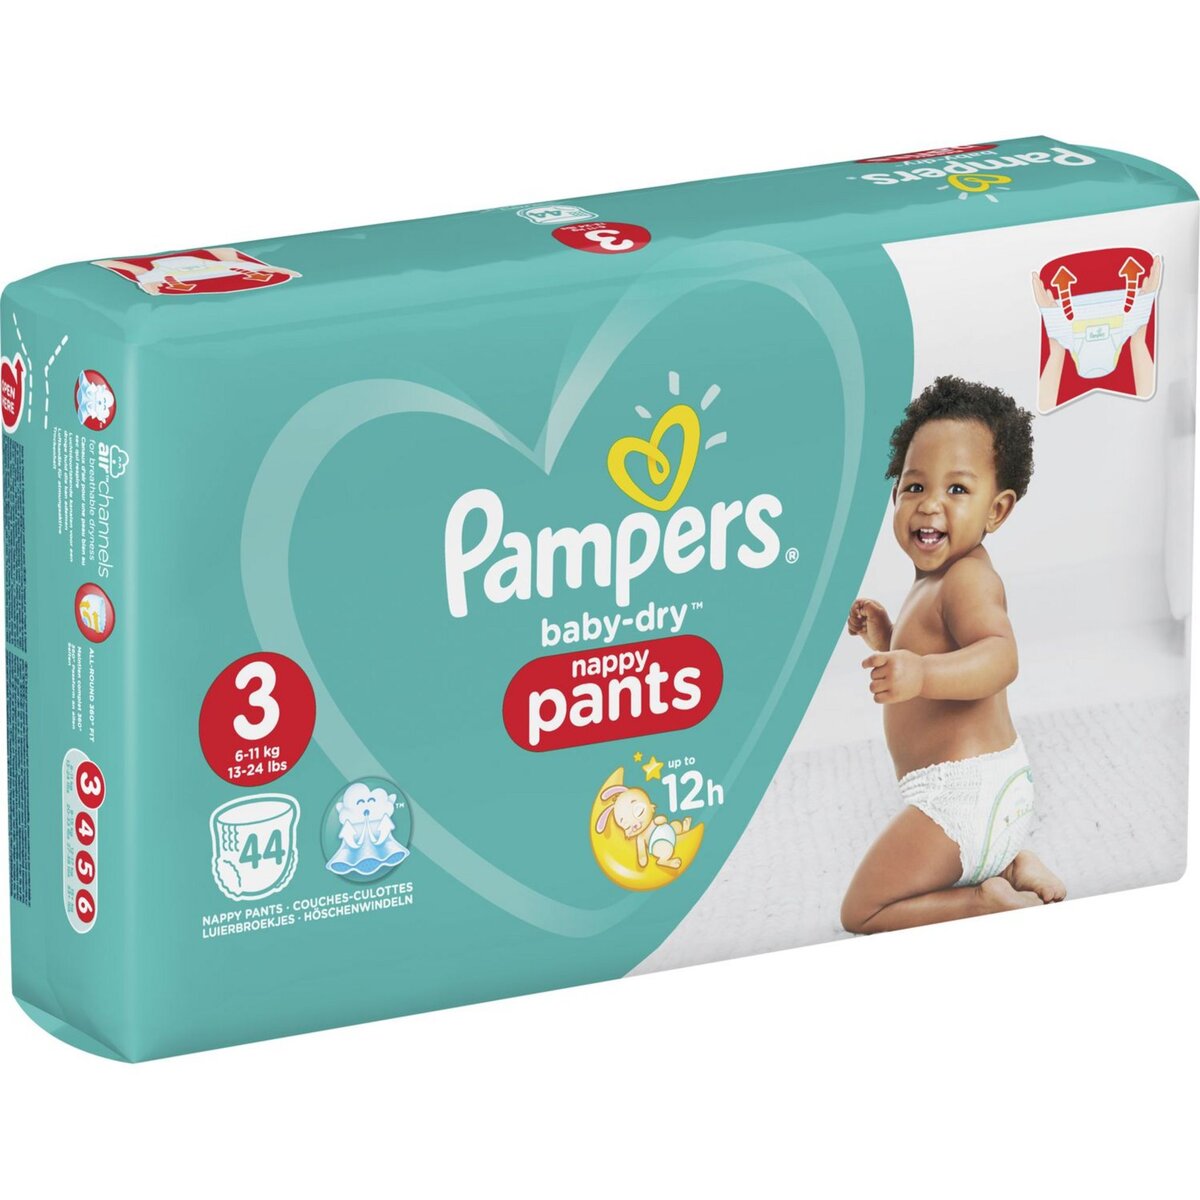 pieluchy pampers buedronka